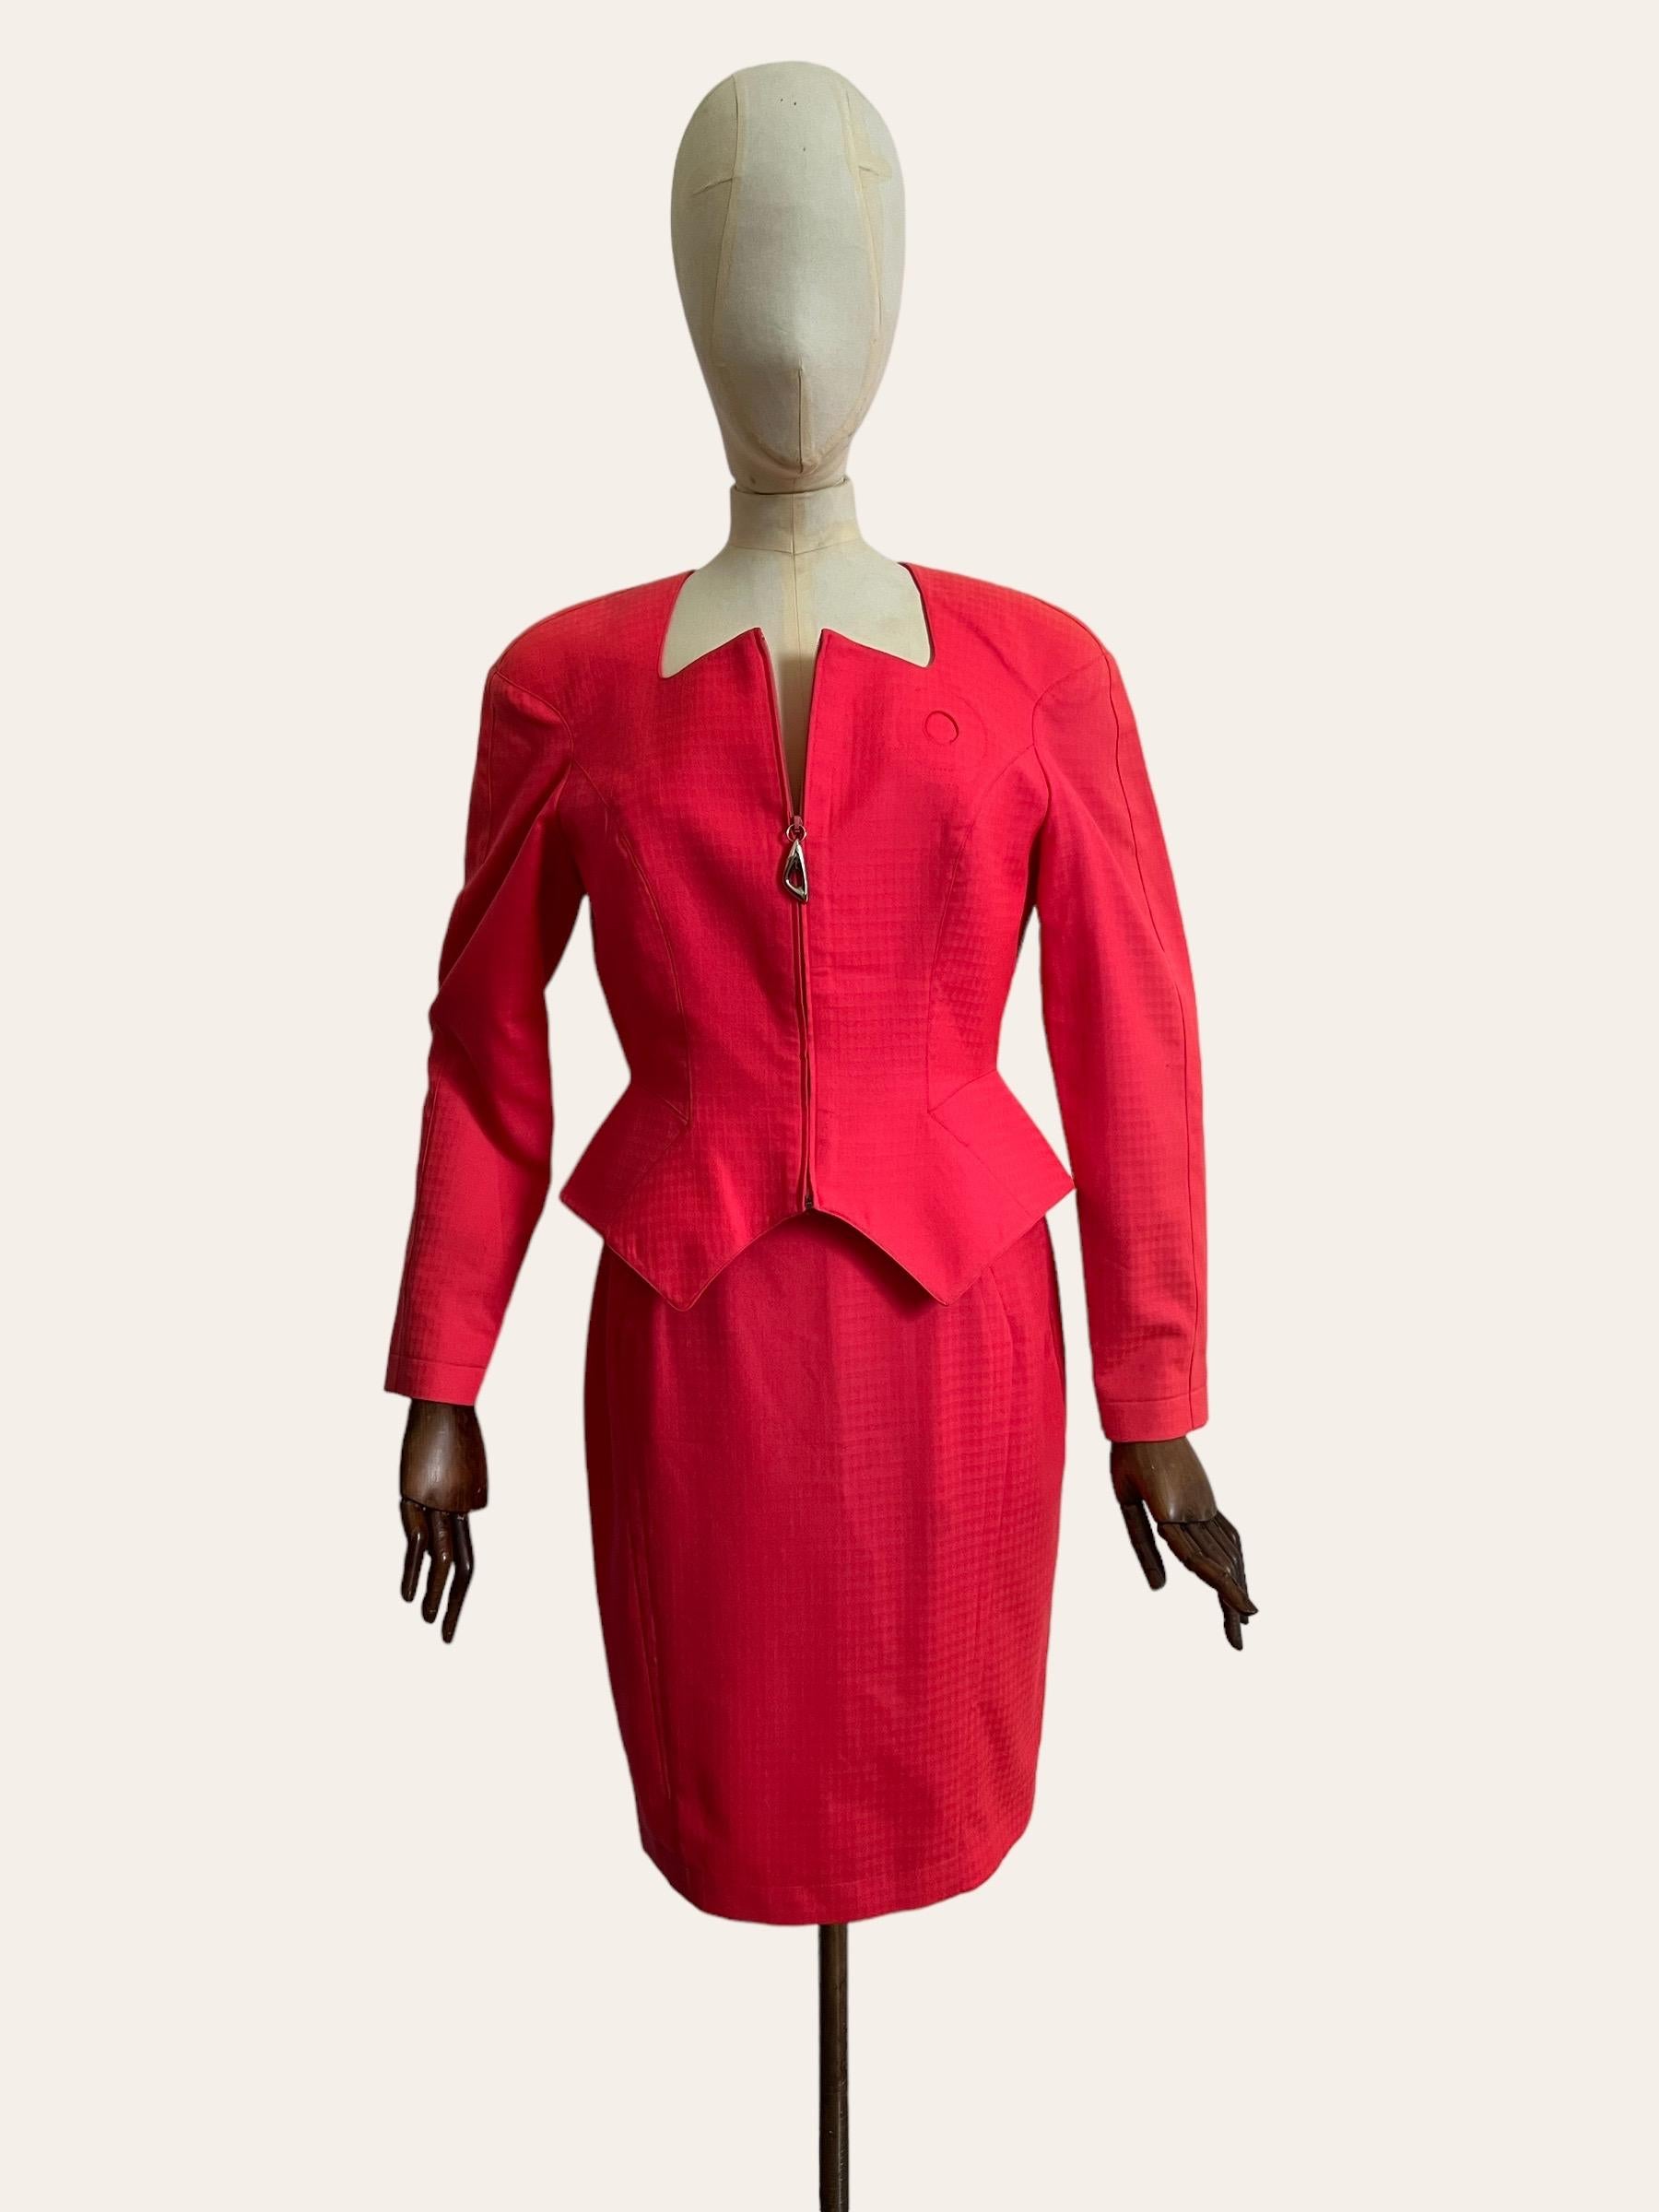 Vintage 1980's Thierry Mugler Skirt and Jacket Suit.

This Iconic Set features a fitted, nipped waist Jacket with statement padded shoulders and matching high waisted fit pencil skirt. Both garments are fully lined and have Zip fasten closures.

The